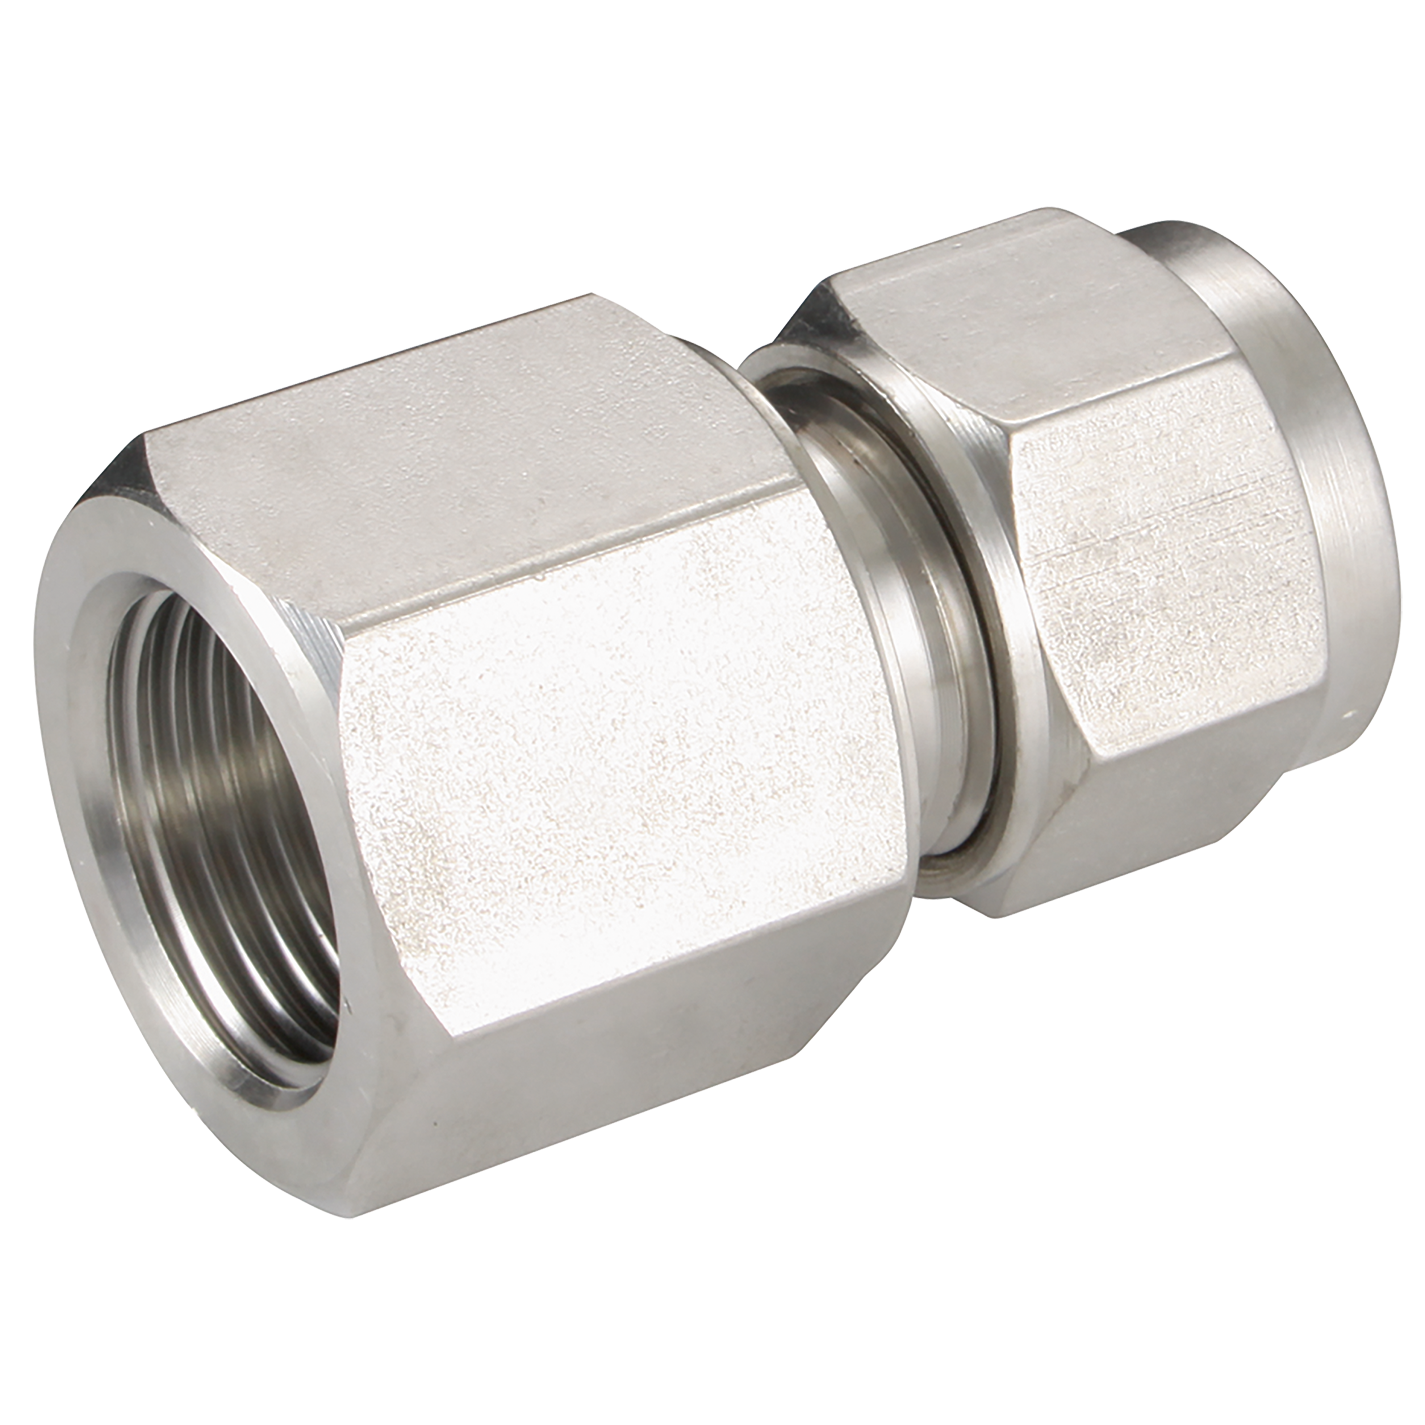 FEMALE CONNECTOR 10 OD 3/8 BSPP